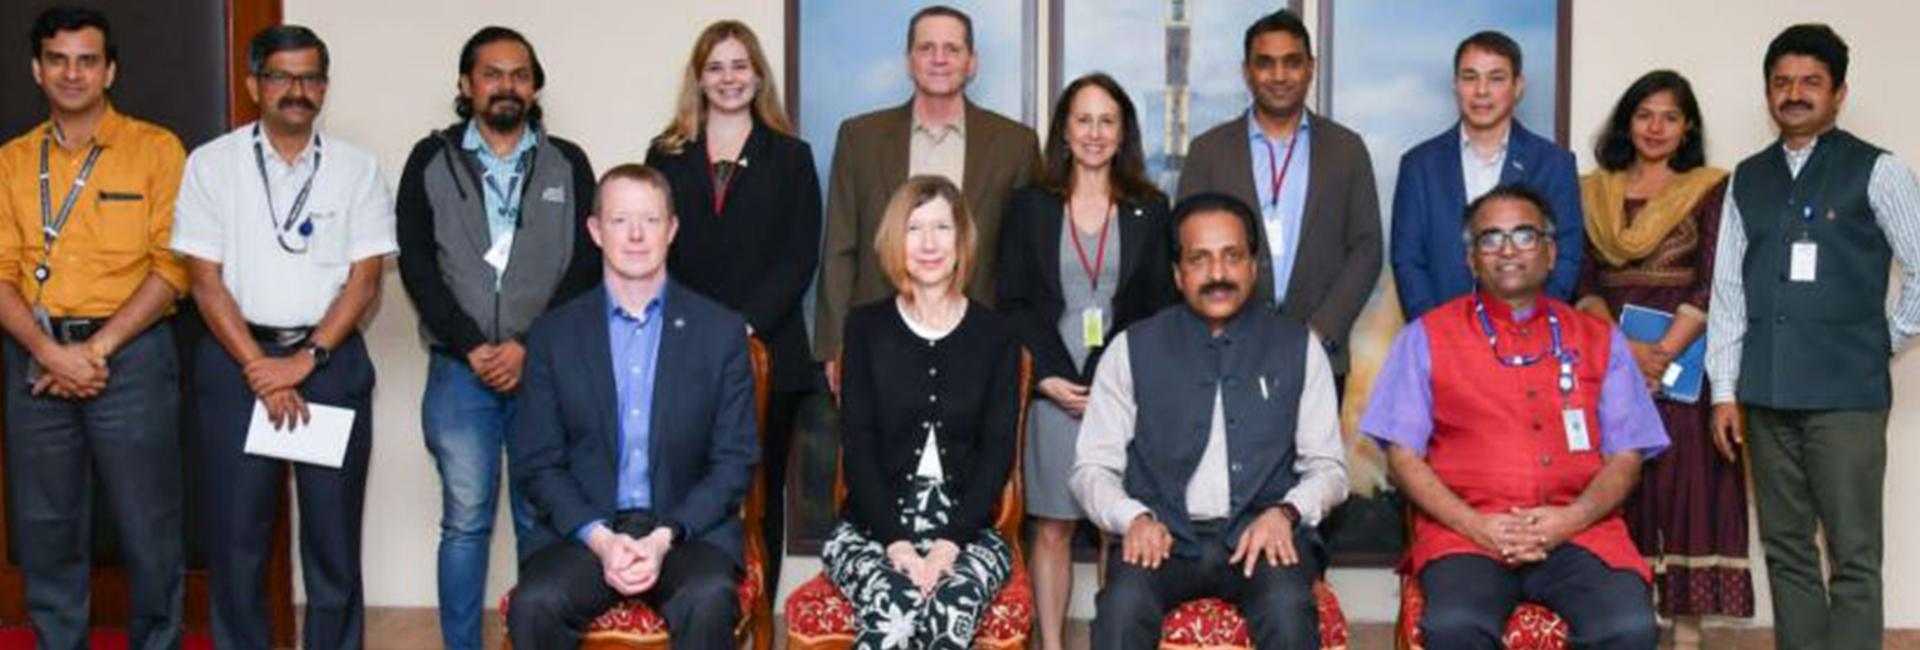 Kathryn Lueders, associate administrator for the space operations mission directorate at NASA was on an India tour. She visited ISRO and met chairman S Somnath, human spaceflight director Dr Umamaheswaran R, and other members of the ISRO workforce. 